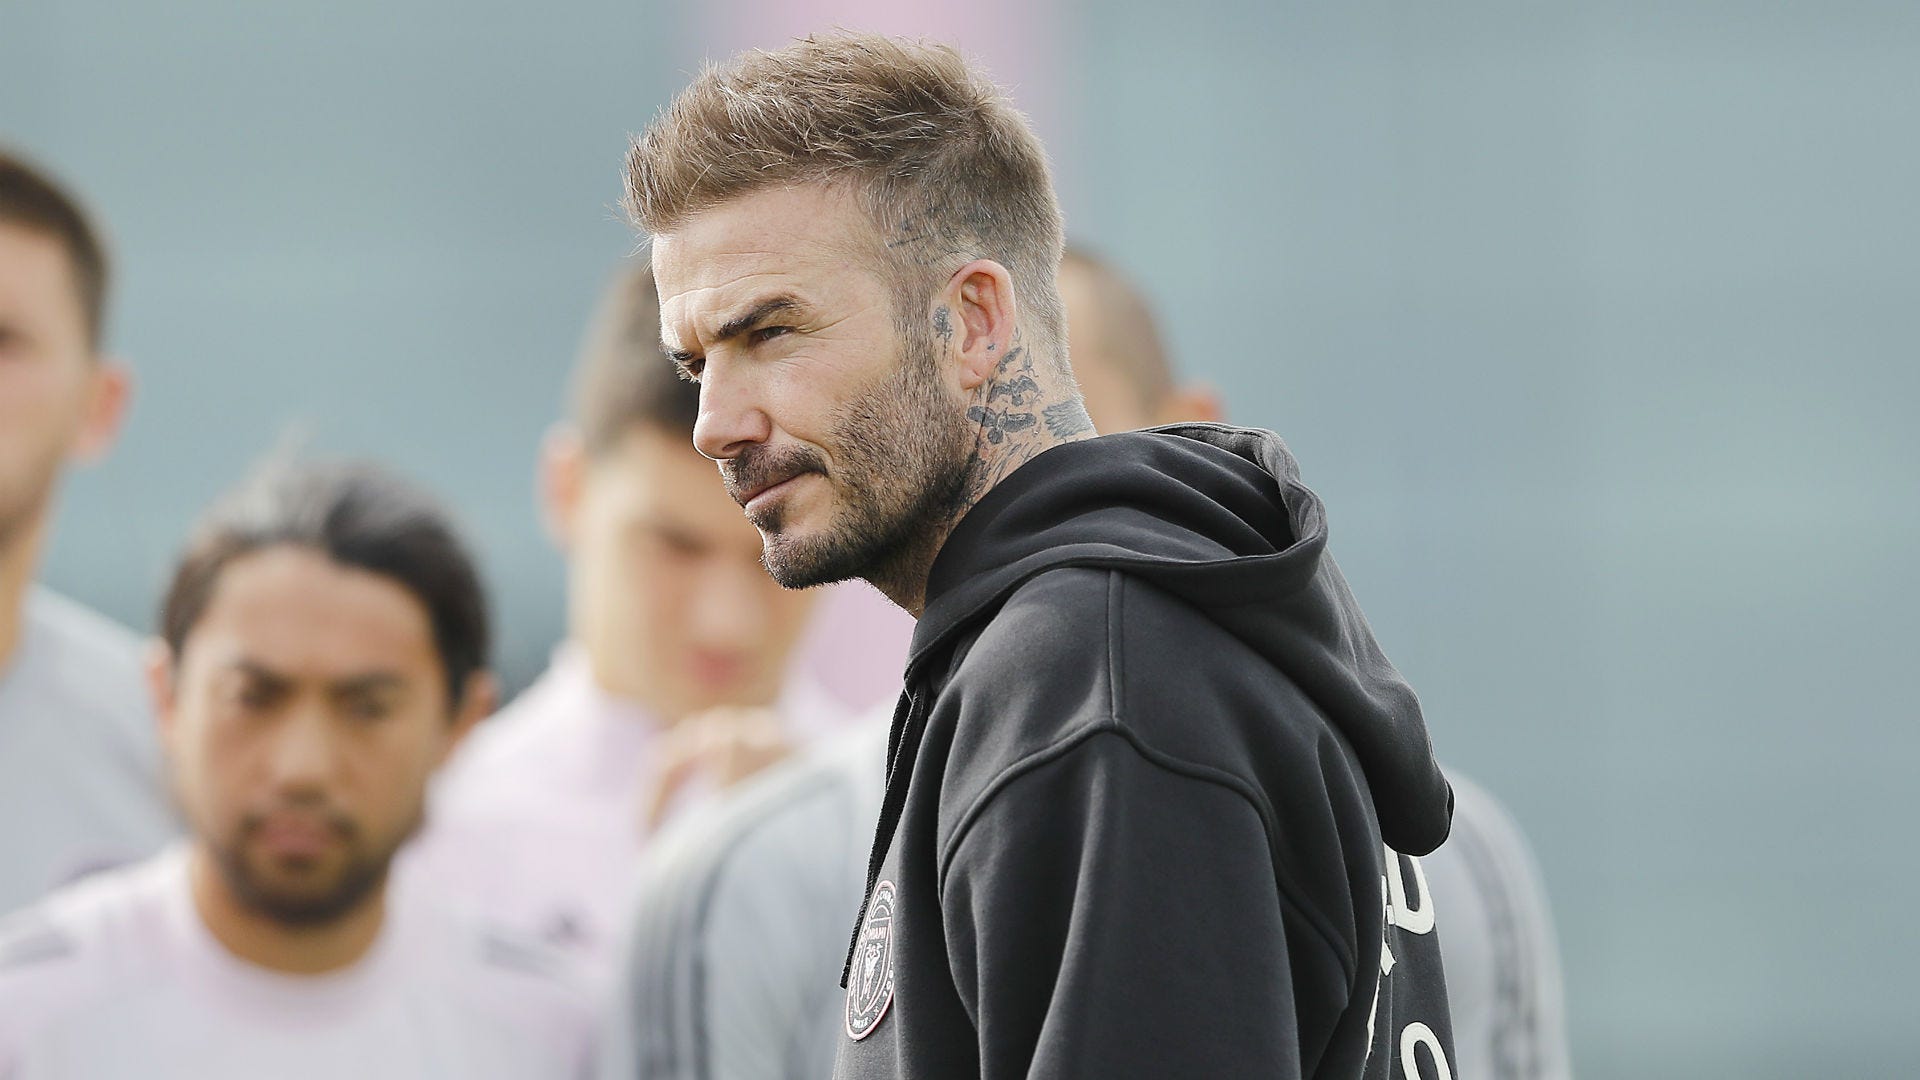 New manager, new mentality Beckham's back to build Inter Miami his own